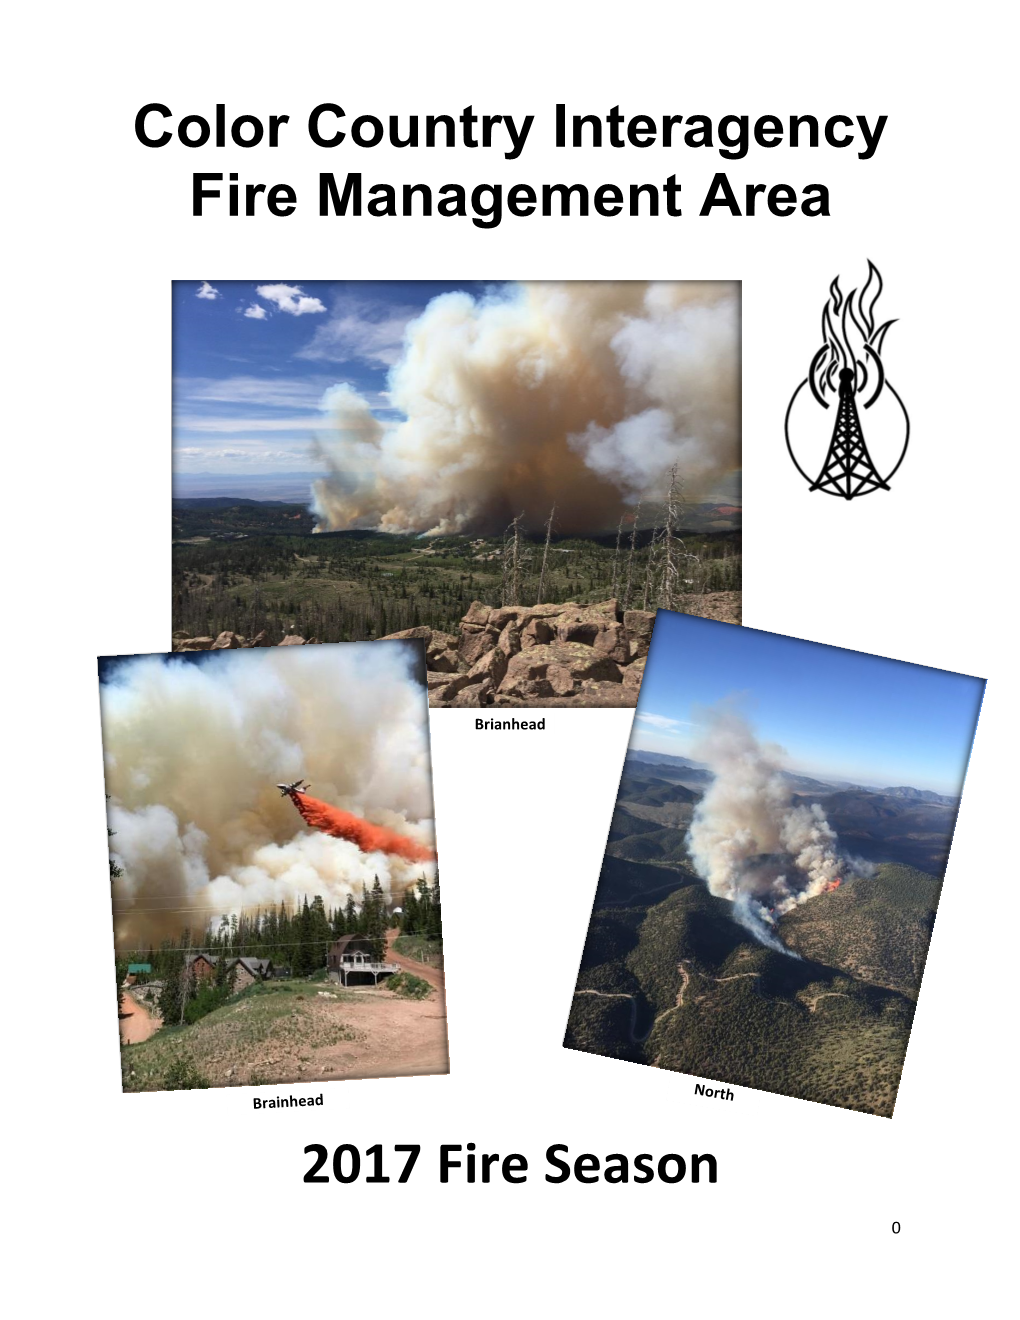 Color Country Interagency Fire Management Area 2017 Fire Season